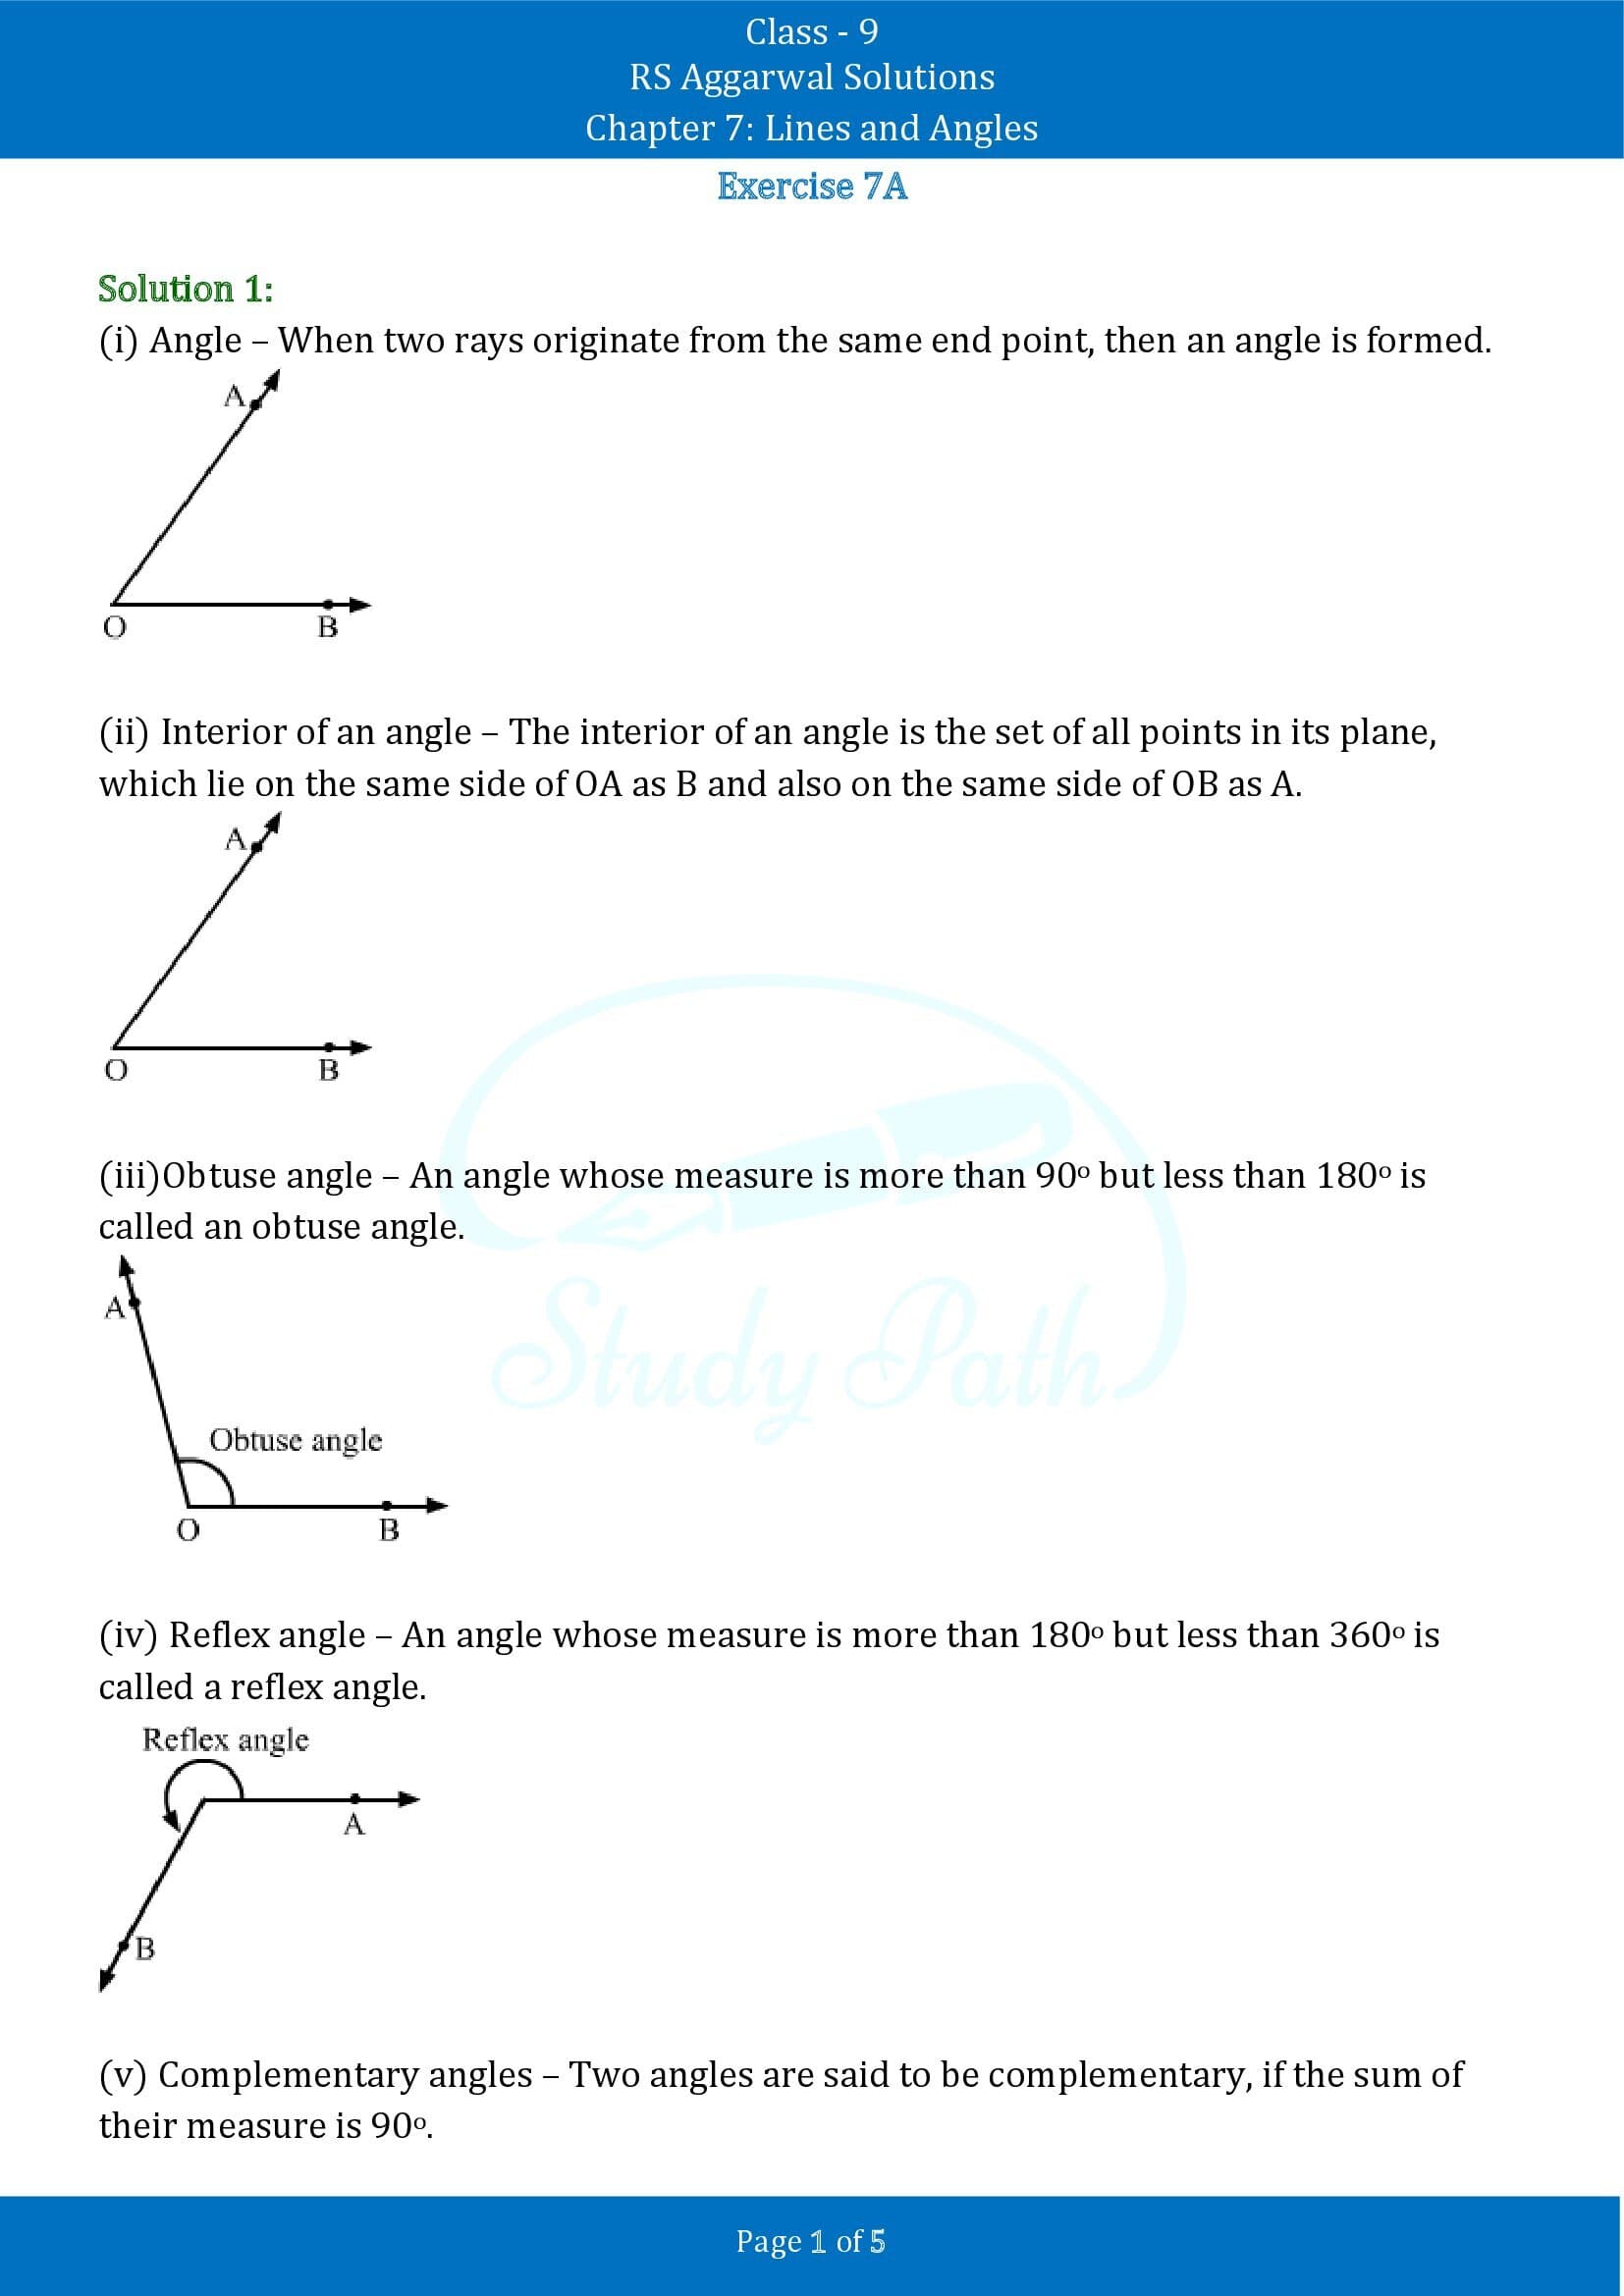 RS Aggarwal Solutions Class 9 Chapter 7 Lines and Angles Exercise 7A 00001